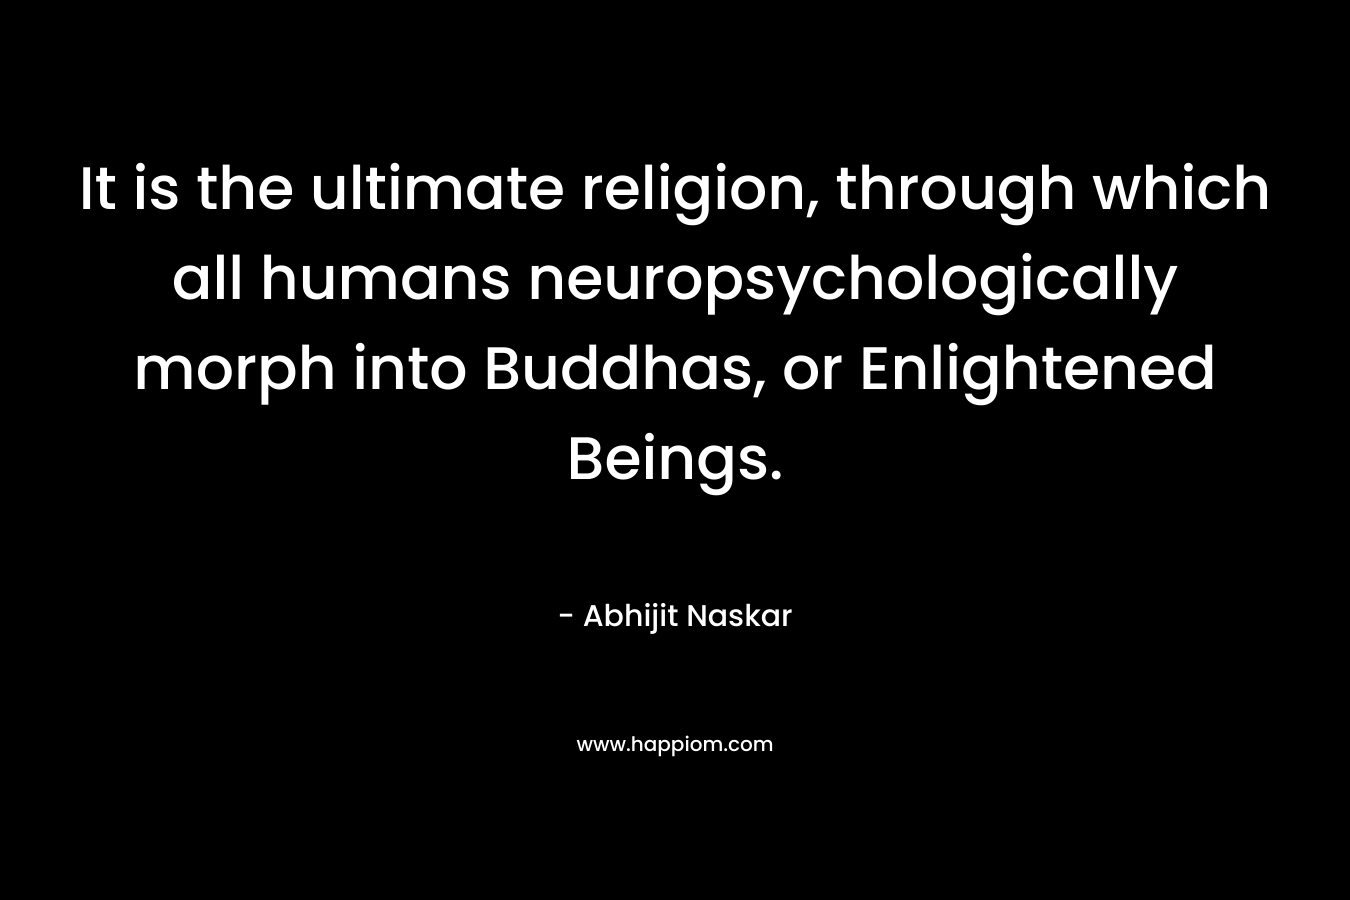 It is the ultimate religion, through which all humans neuropsychologically morph into Buddhas, or Enlightened Beings.